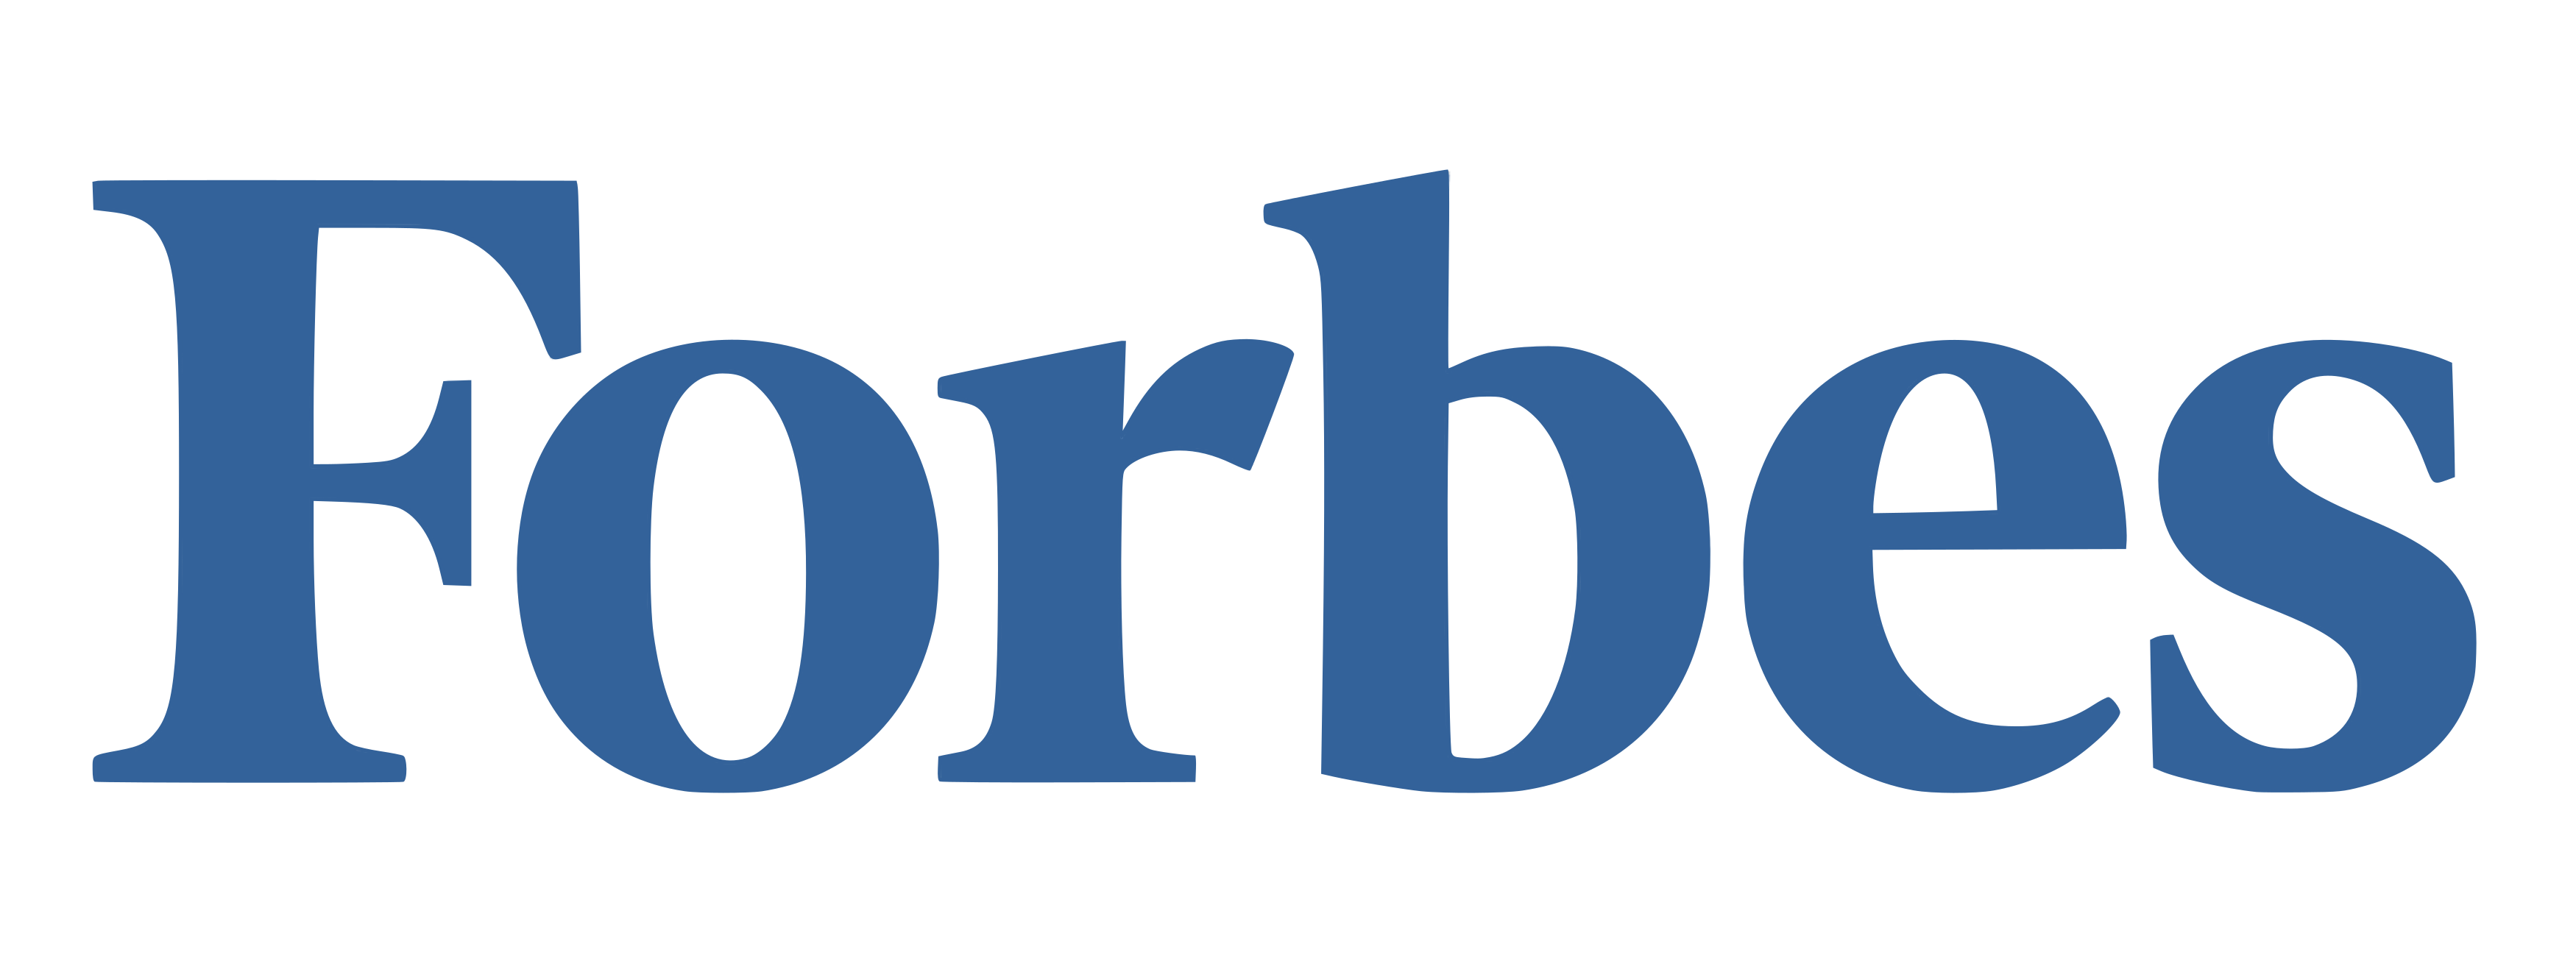 Forbes Logo   Png And Vector   Logo Download - Forbes, Transparent background PNG HD thumbnail